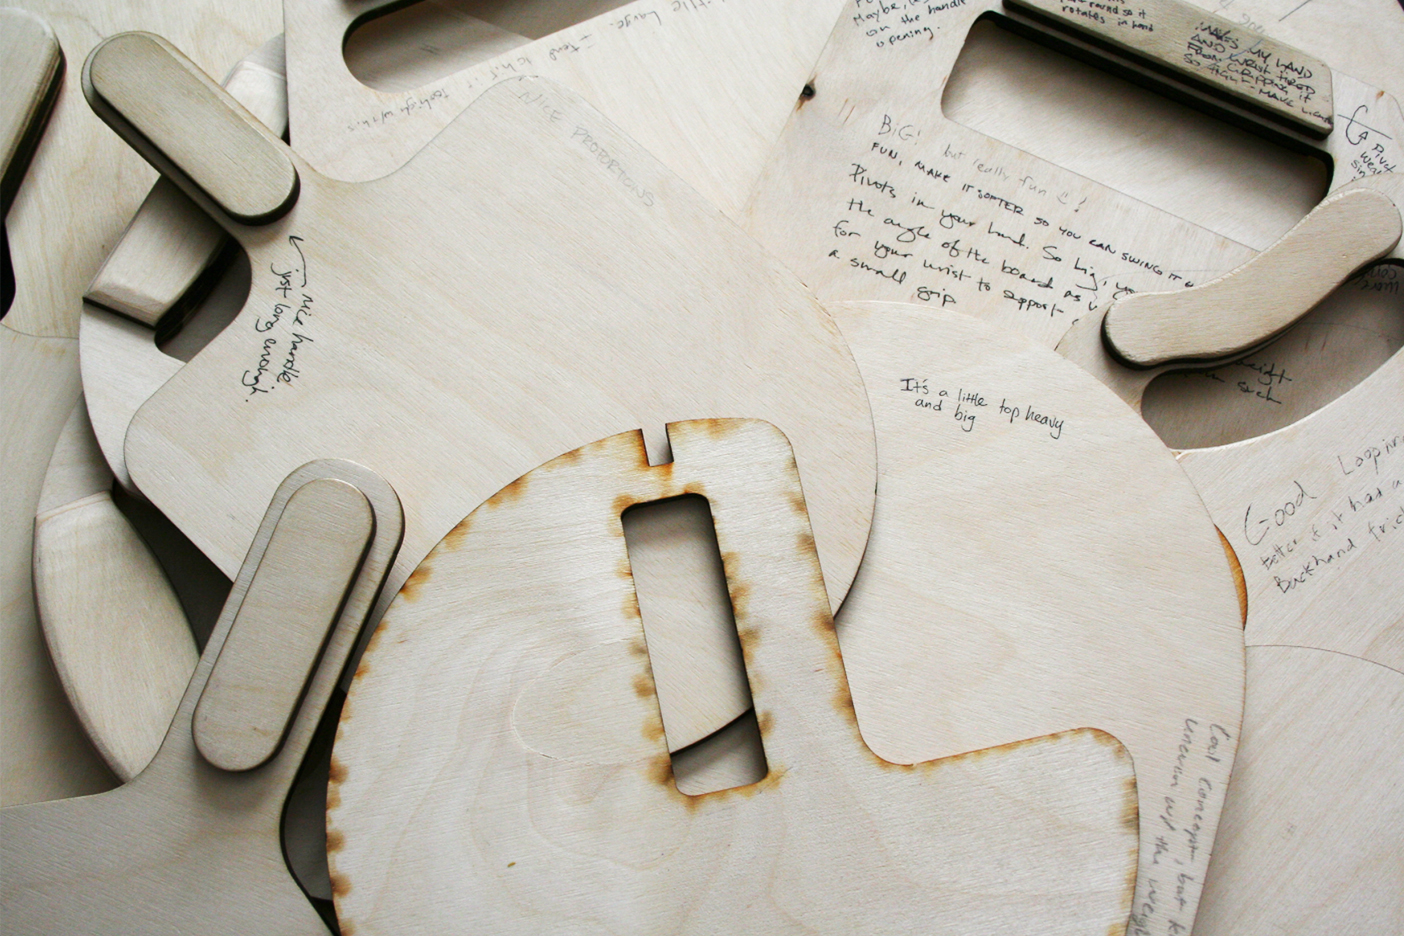 A closeup of plywood paddle iterations with writing scrawled on the paddles.